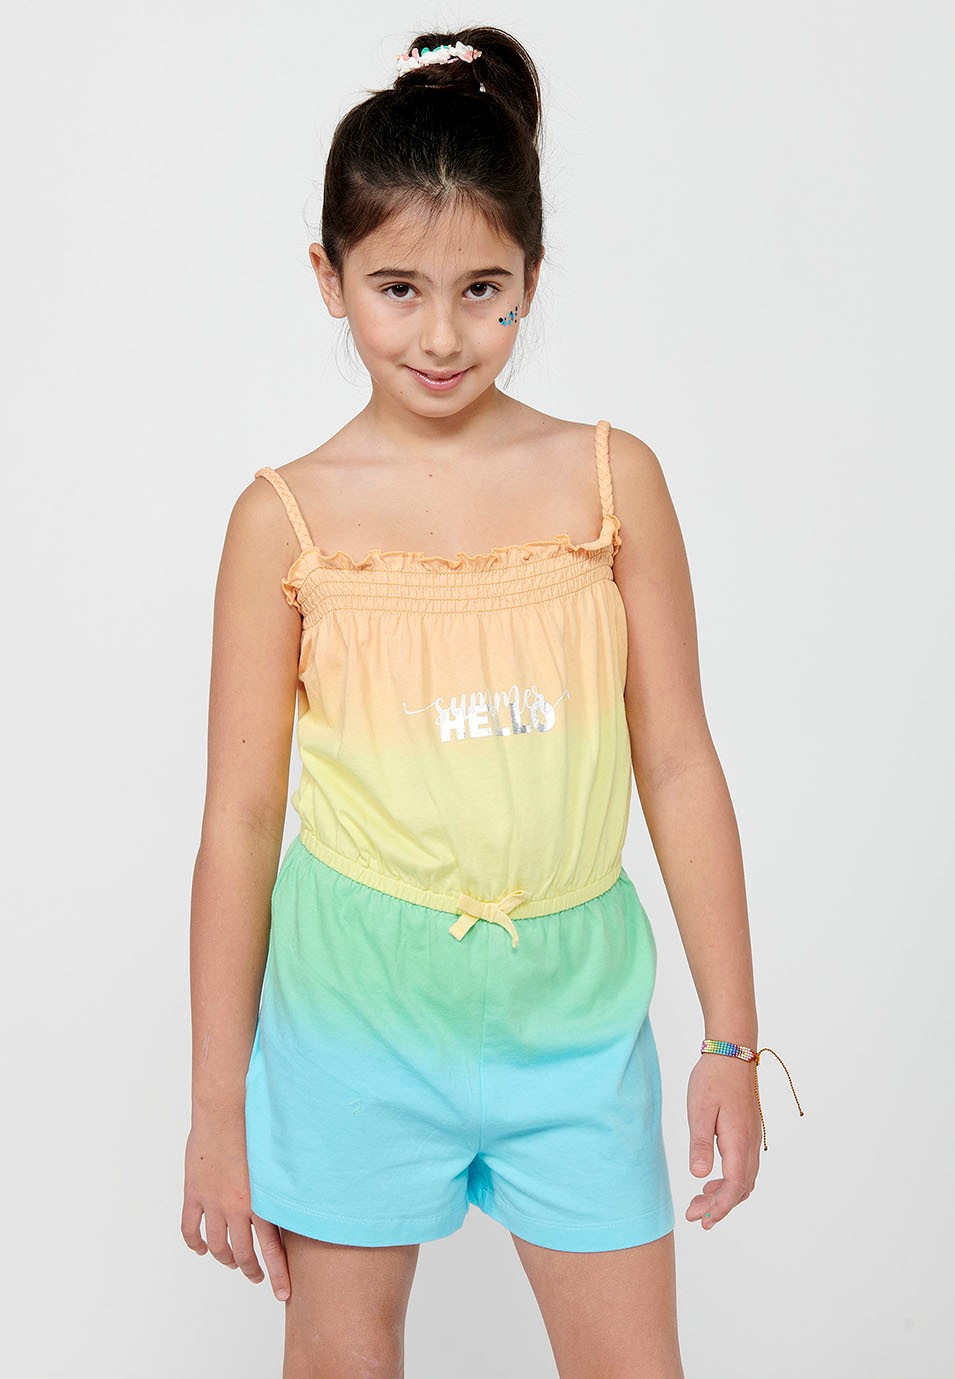 Cotton Strap Jumpsuit Dress with Front Print and Adjusted at the Waist with Elastic Band and Fabric in Multicolor Gradient Colors for Girl 5